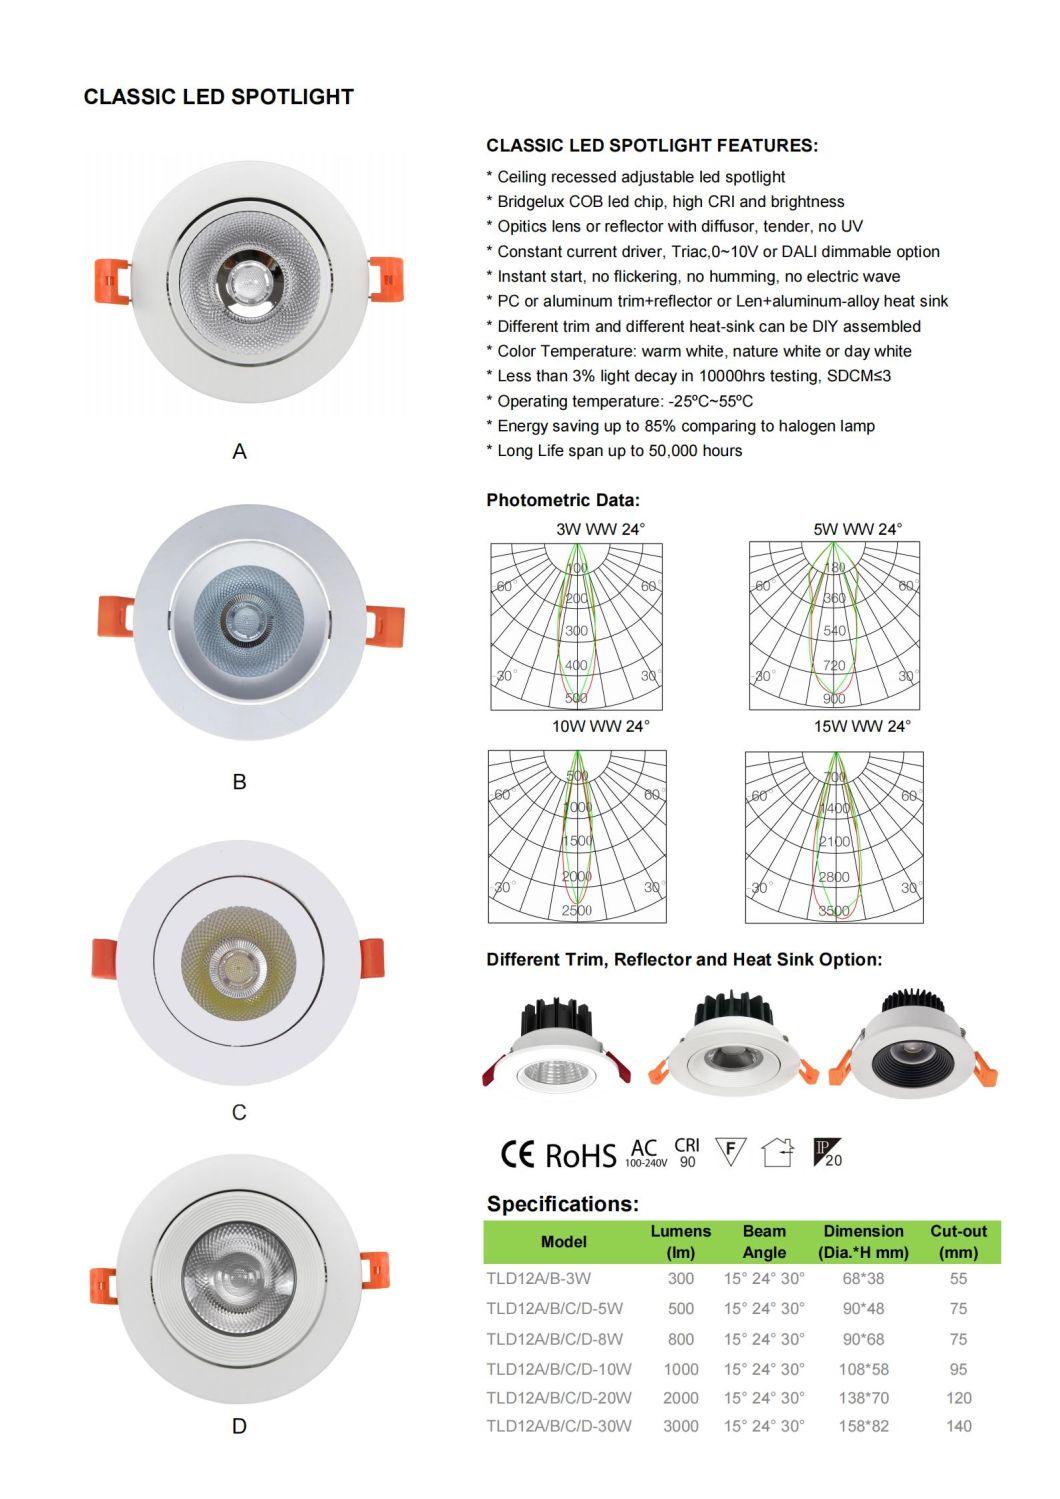 5W Wholesale Ceiling Recessed Adjustable LED Spot Downlight for Commercial Project Office Hotel Apartment Residential Corridor Rooms Spotlight